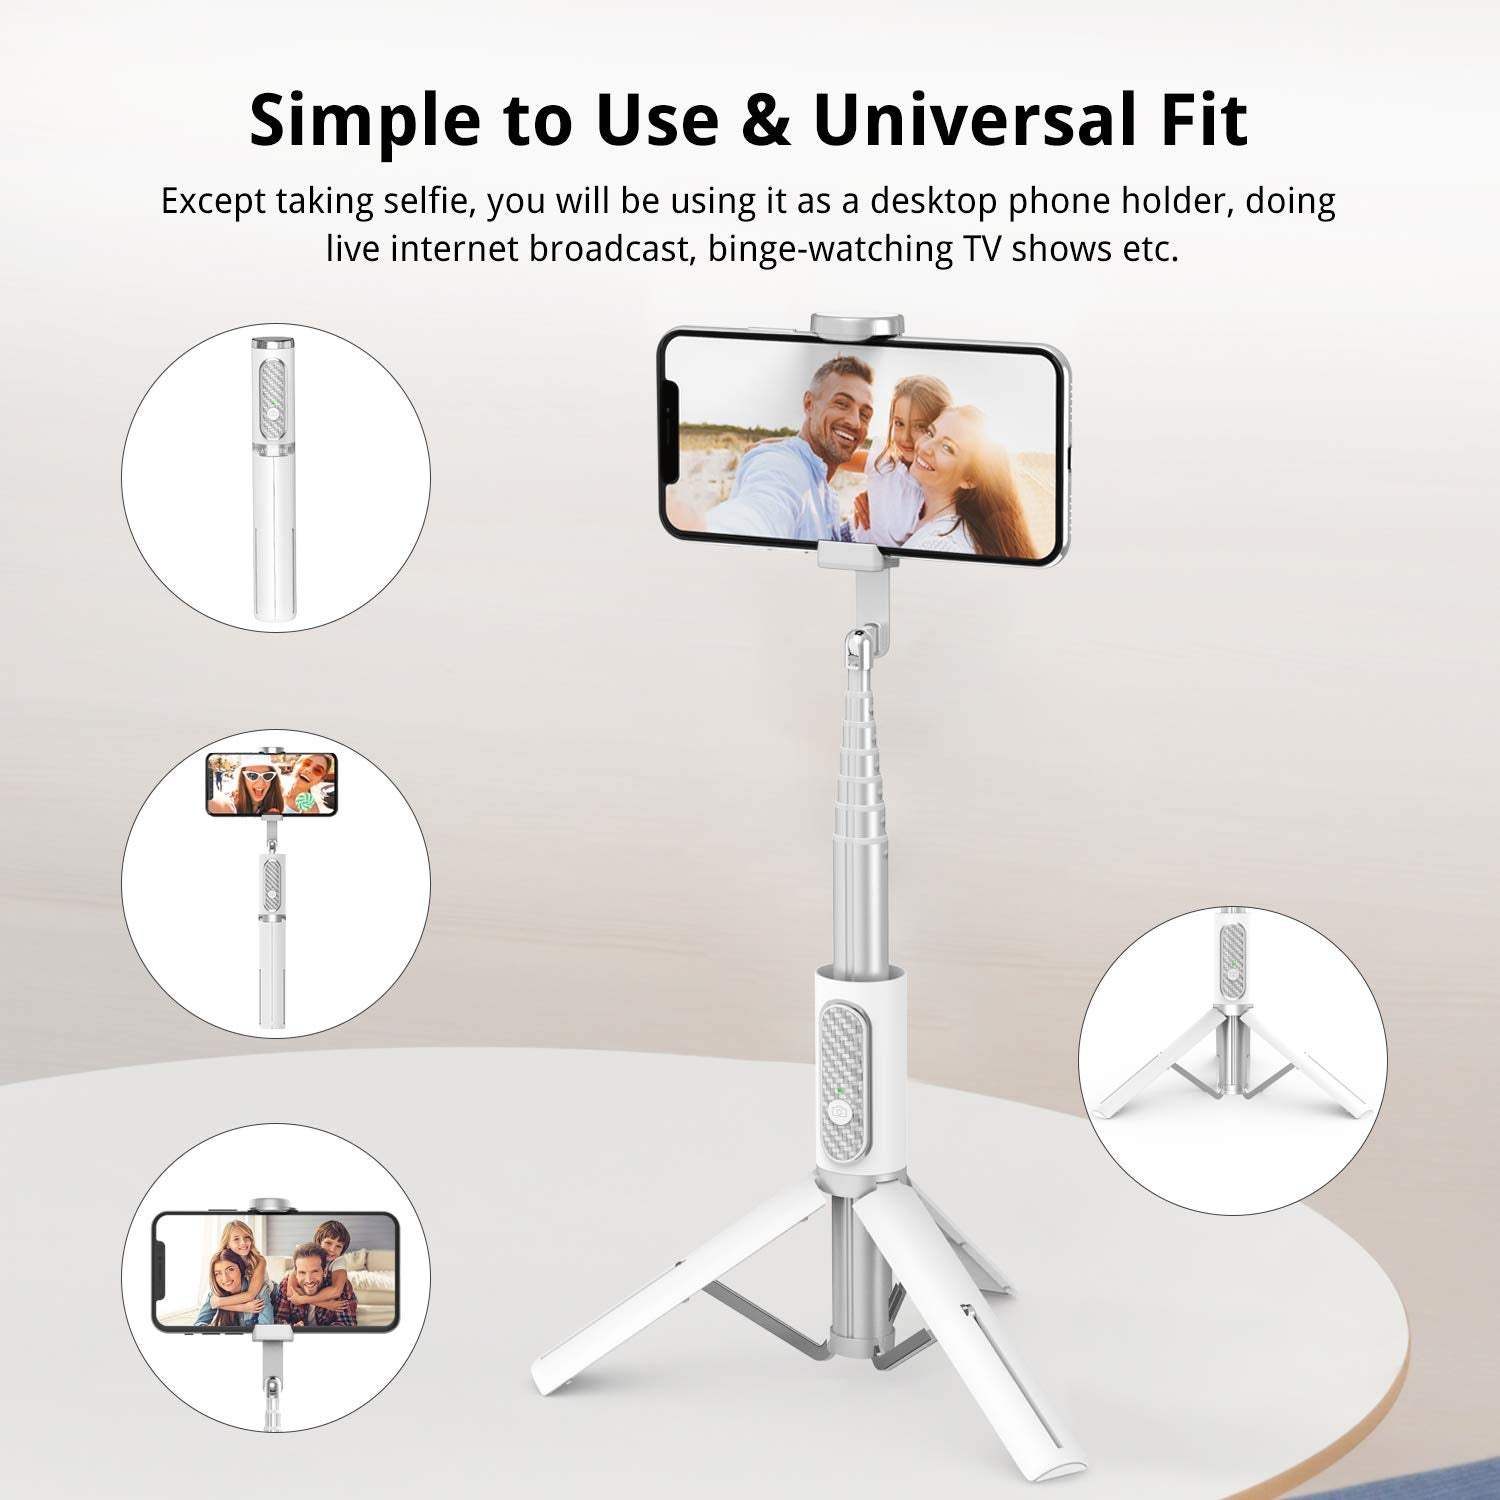 ATUMTEK Selfie Stick Tripod, Extendable 3 in 1 Aluminum Bluetooth Selfie Stick with Wireless Remote for iPhone 13/13 Pro/12/11 Pro/XS Max/XS/XR/X/8/7, Samsung Huawei LG Google Sony Smartphones, White